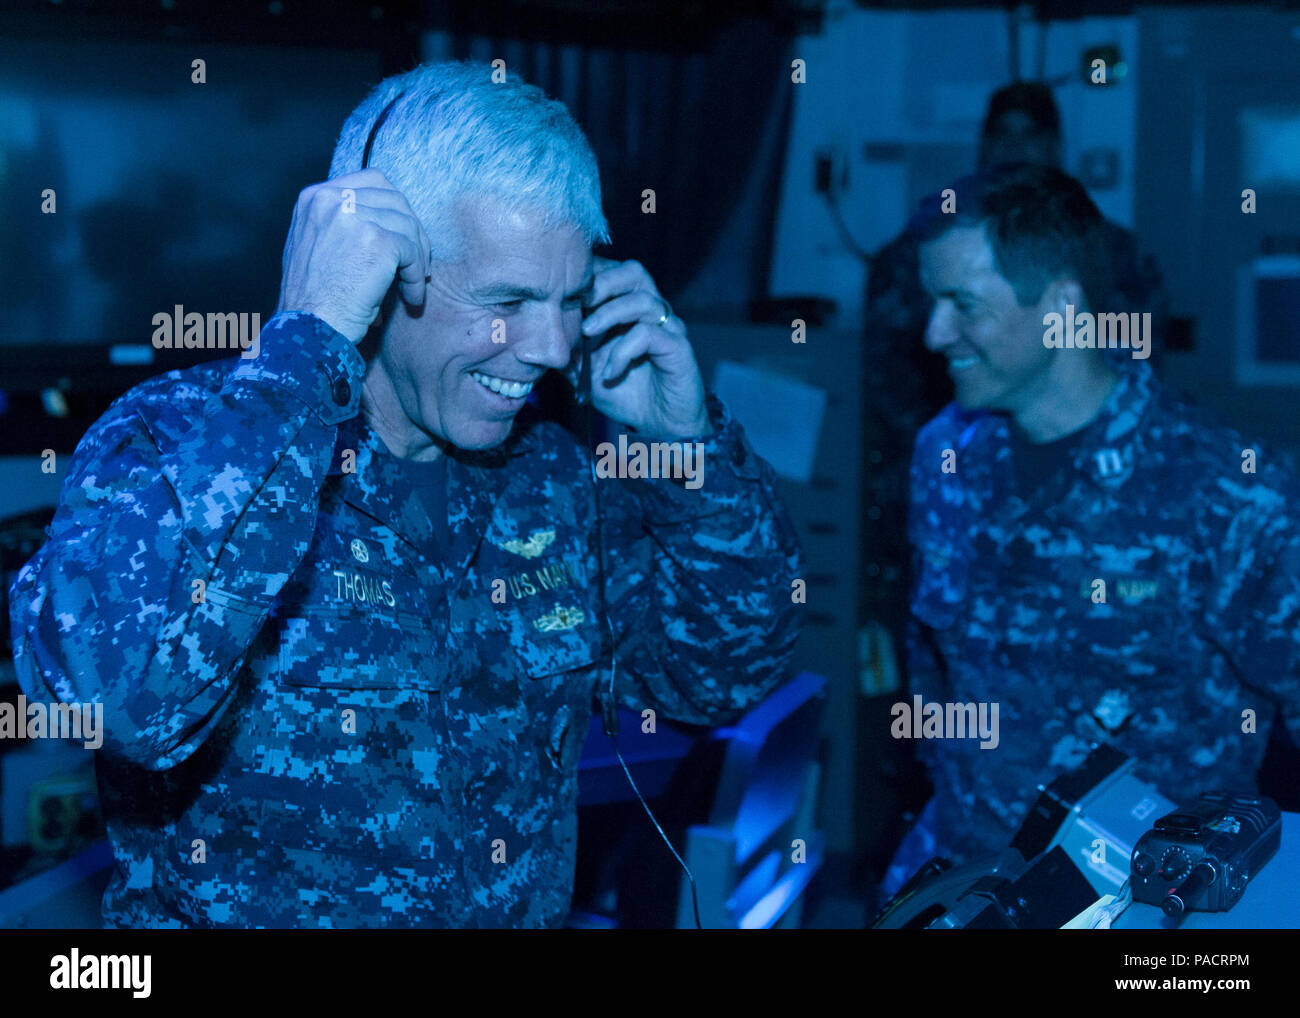 160322-N-DI878-053 (March 22, 2016) SAN DIEGO – Capt. Karl Thomas, commanding officer, USS Carl Vinson (CVN 70), wears a headset during a demonstration of the first air traffic control simulator installed on board a Navy aircraft carrier in the USS Carl Vinson air traffic control center (CATCC). Carl Vinson is currently pierside in its homeport of San Diego. (U.S. Navy photo by Mass Communication Specialist 3rd Class Giovanni Squadrito/Released) Stock Photo